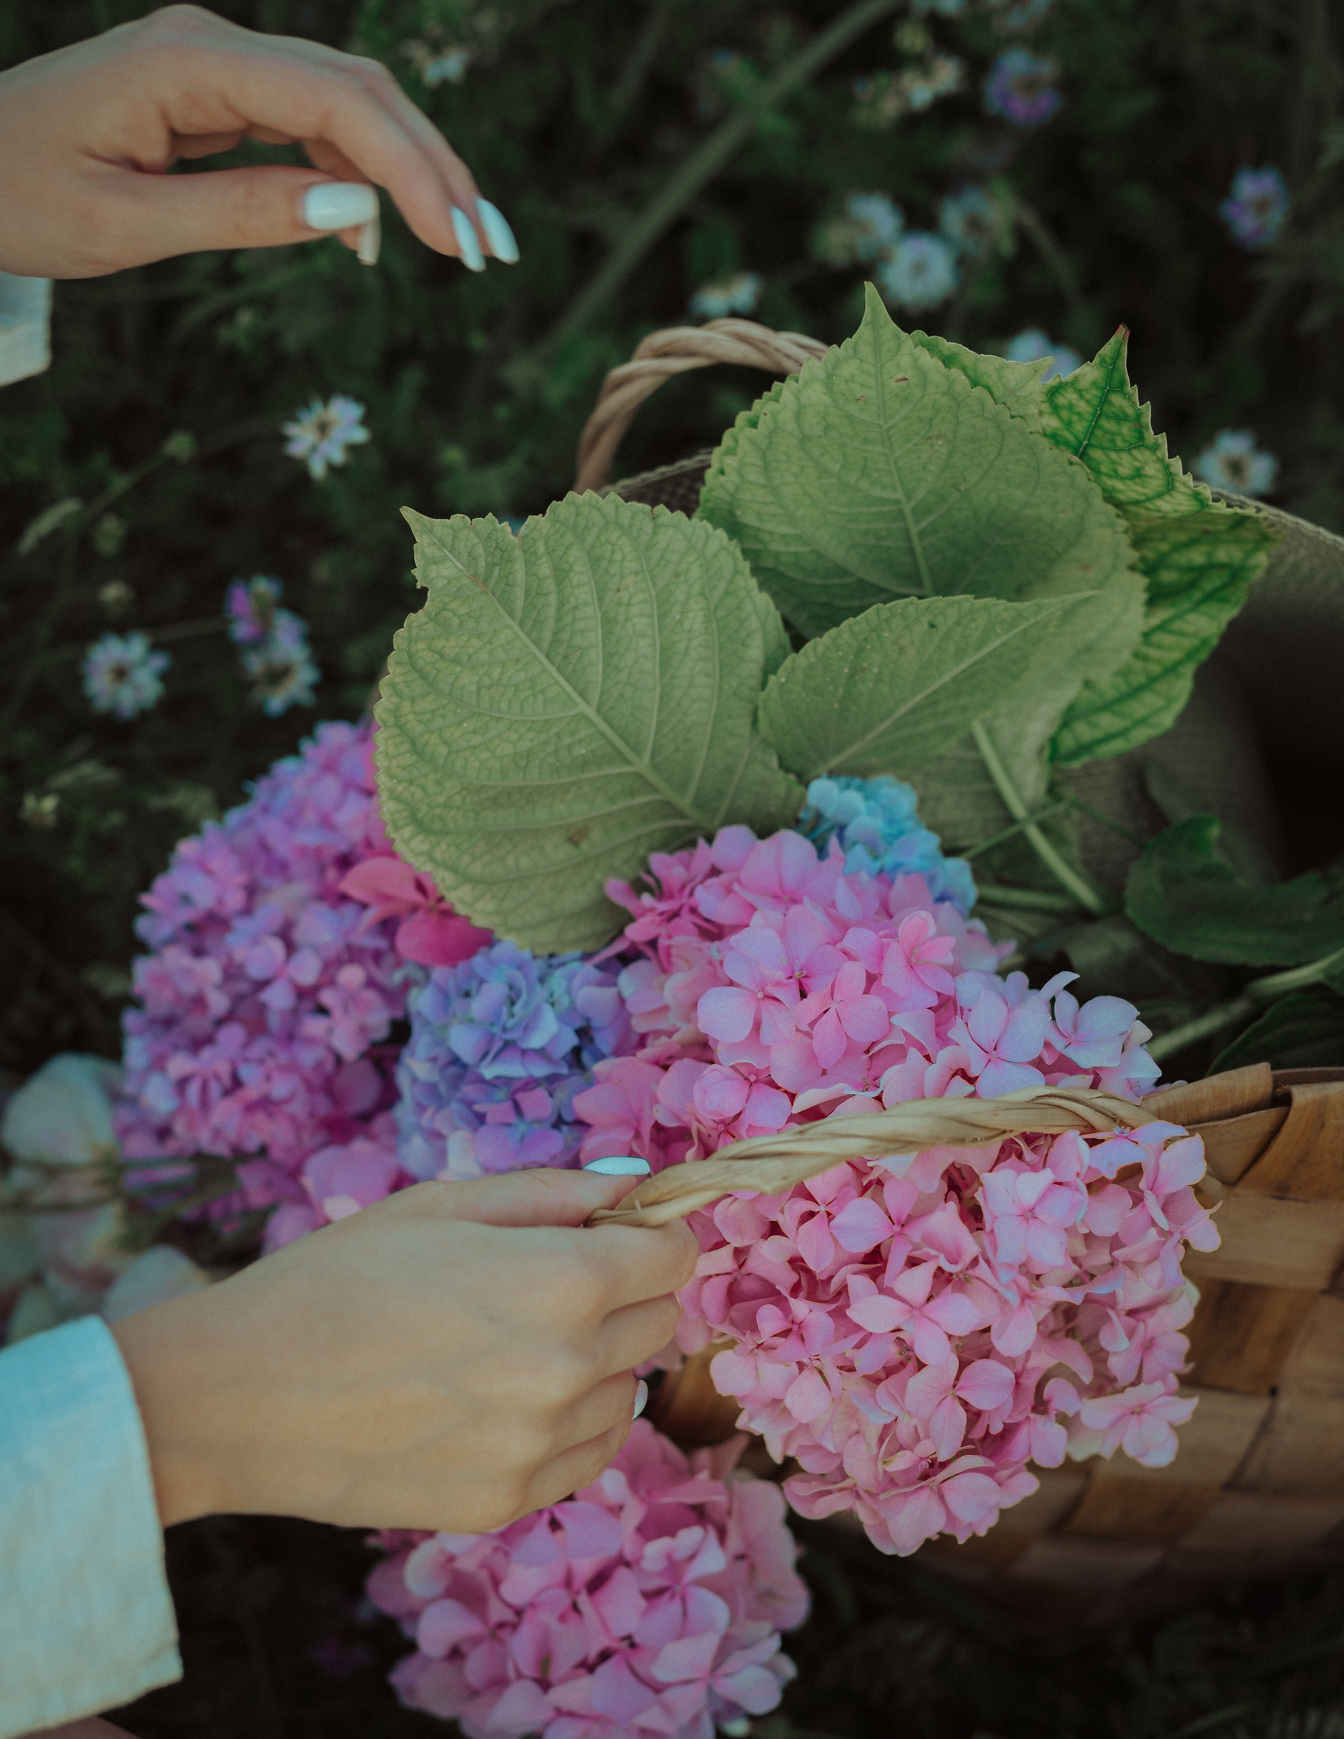 Wicker basket in hand with pinkish and blue hydrangea flowers